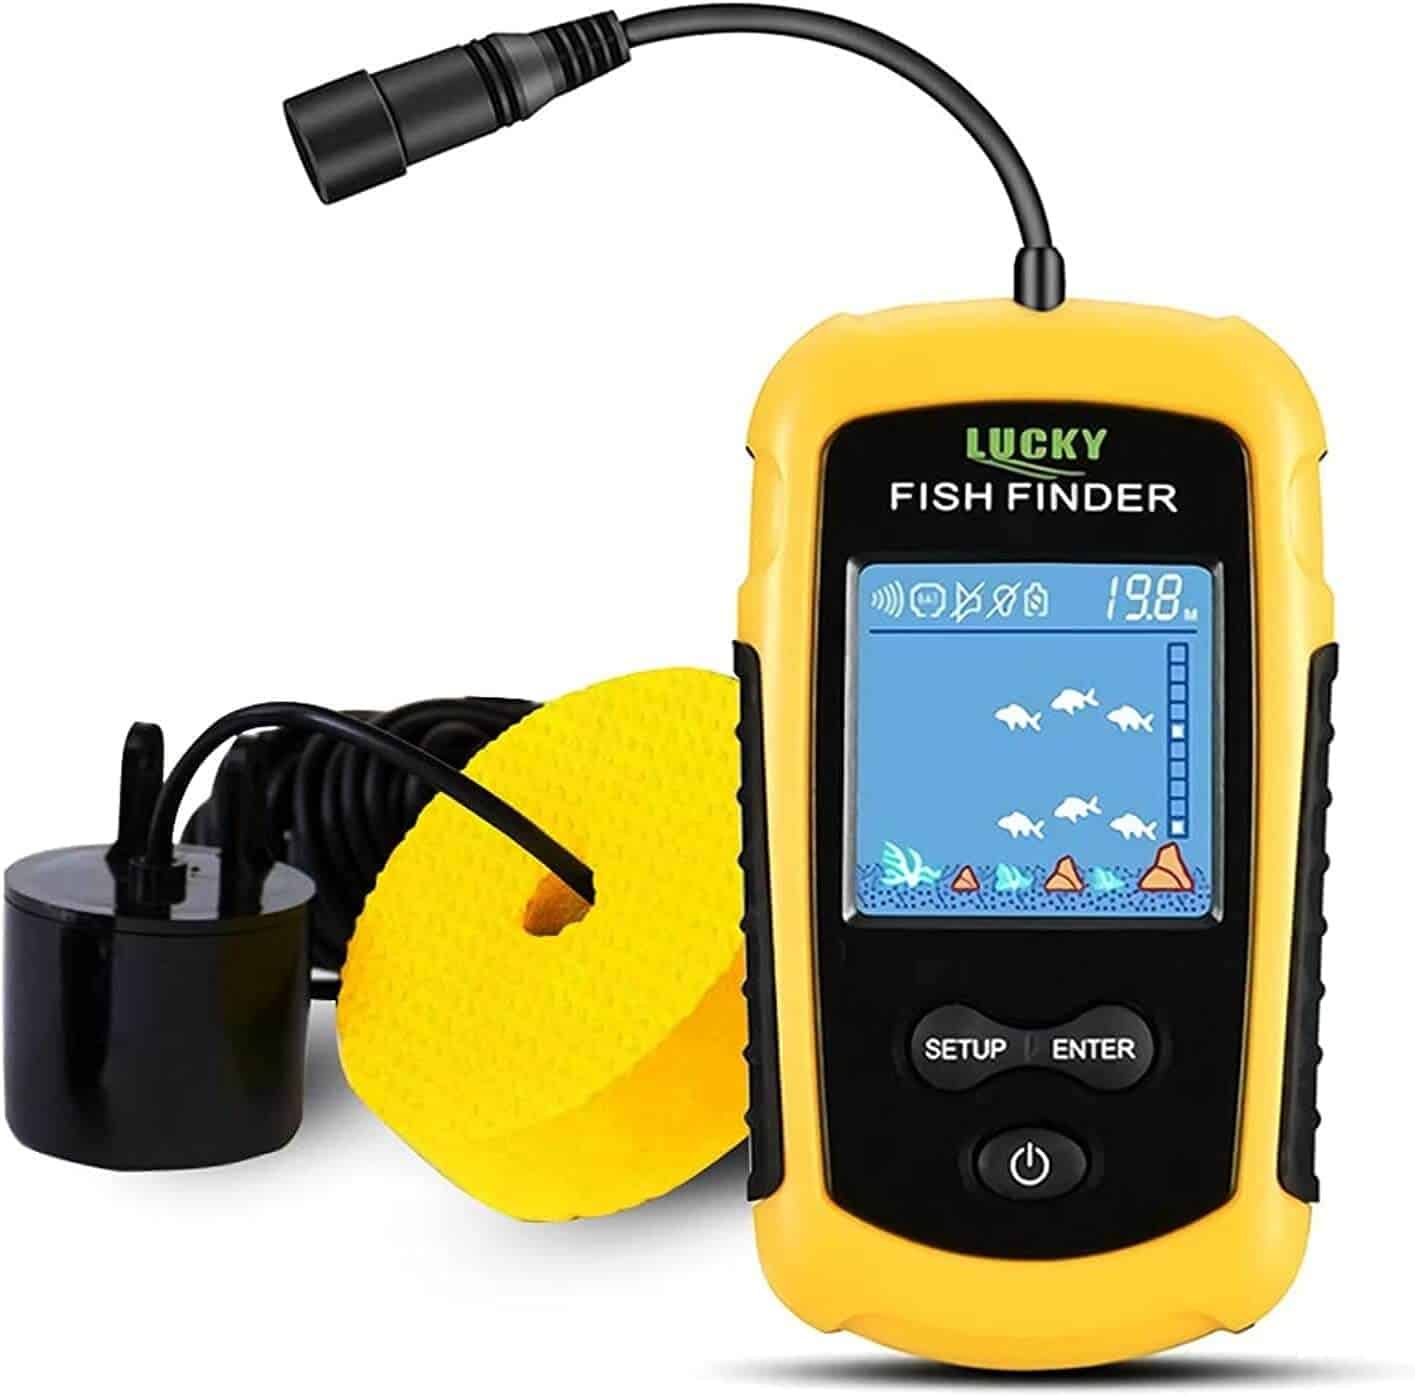 Portable fish finder that displays approximate fish location and water depth. The sonar transducer can be attached to the hull of kayak or boat in order to understand the changing of water depth when you are moving by. The water depth detection range is between 3ft(1m) and 328ft (100m) when the transducer is completely immersed in the water.